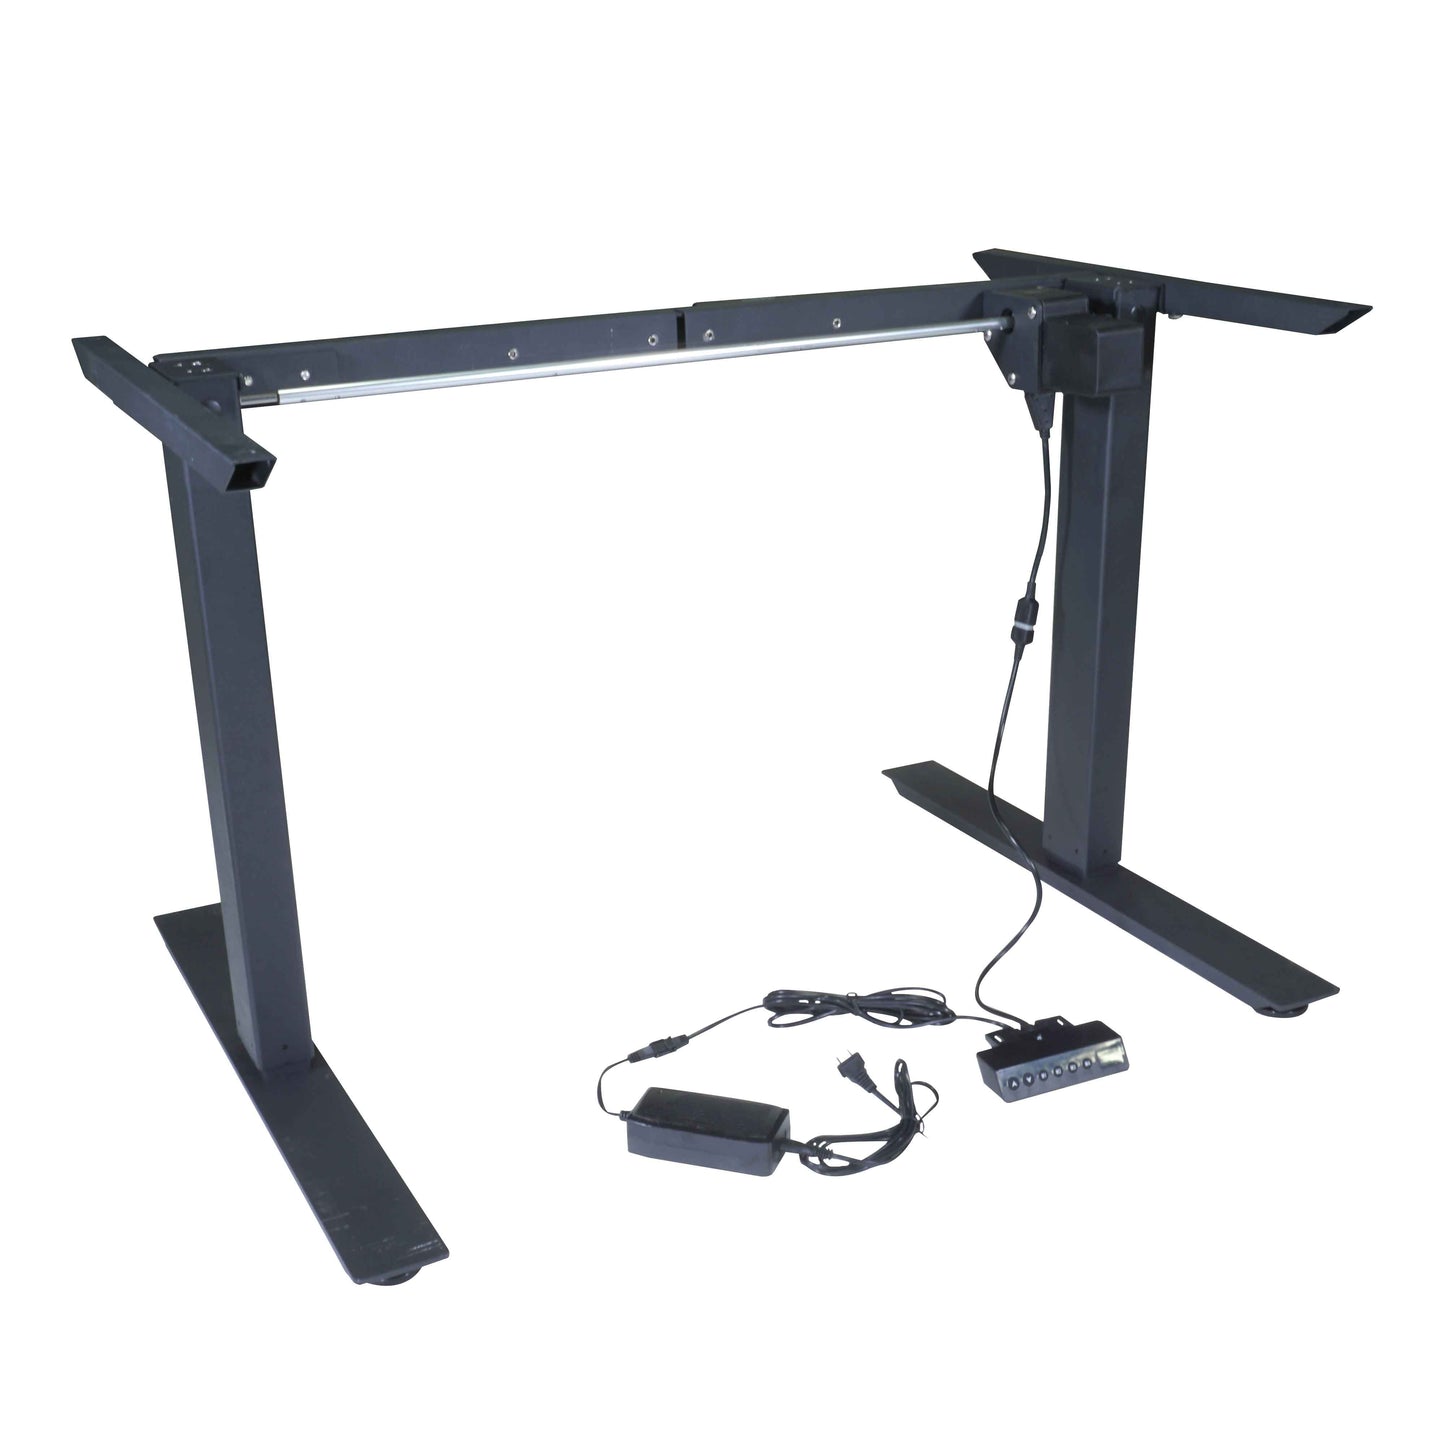 Single Motor Electric Adjustable Height A2 Sit-Stand Desk (Black) - view 2